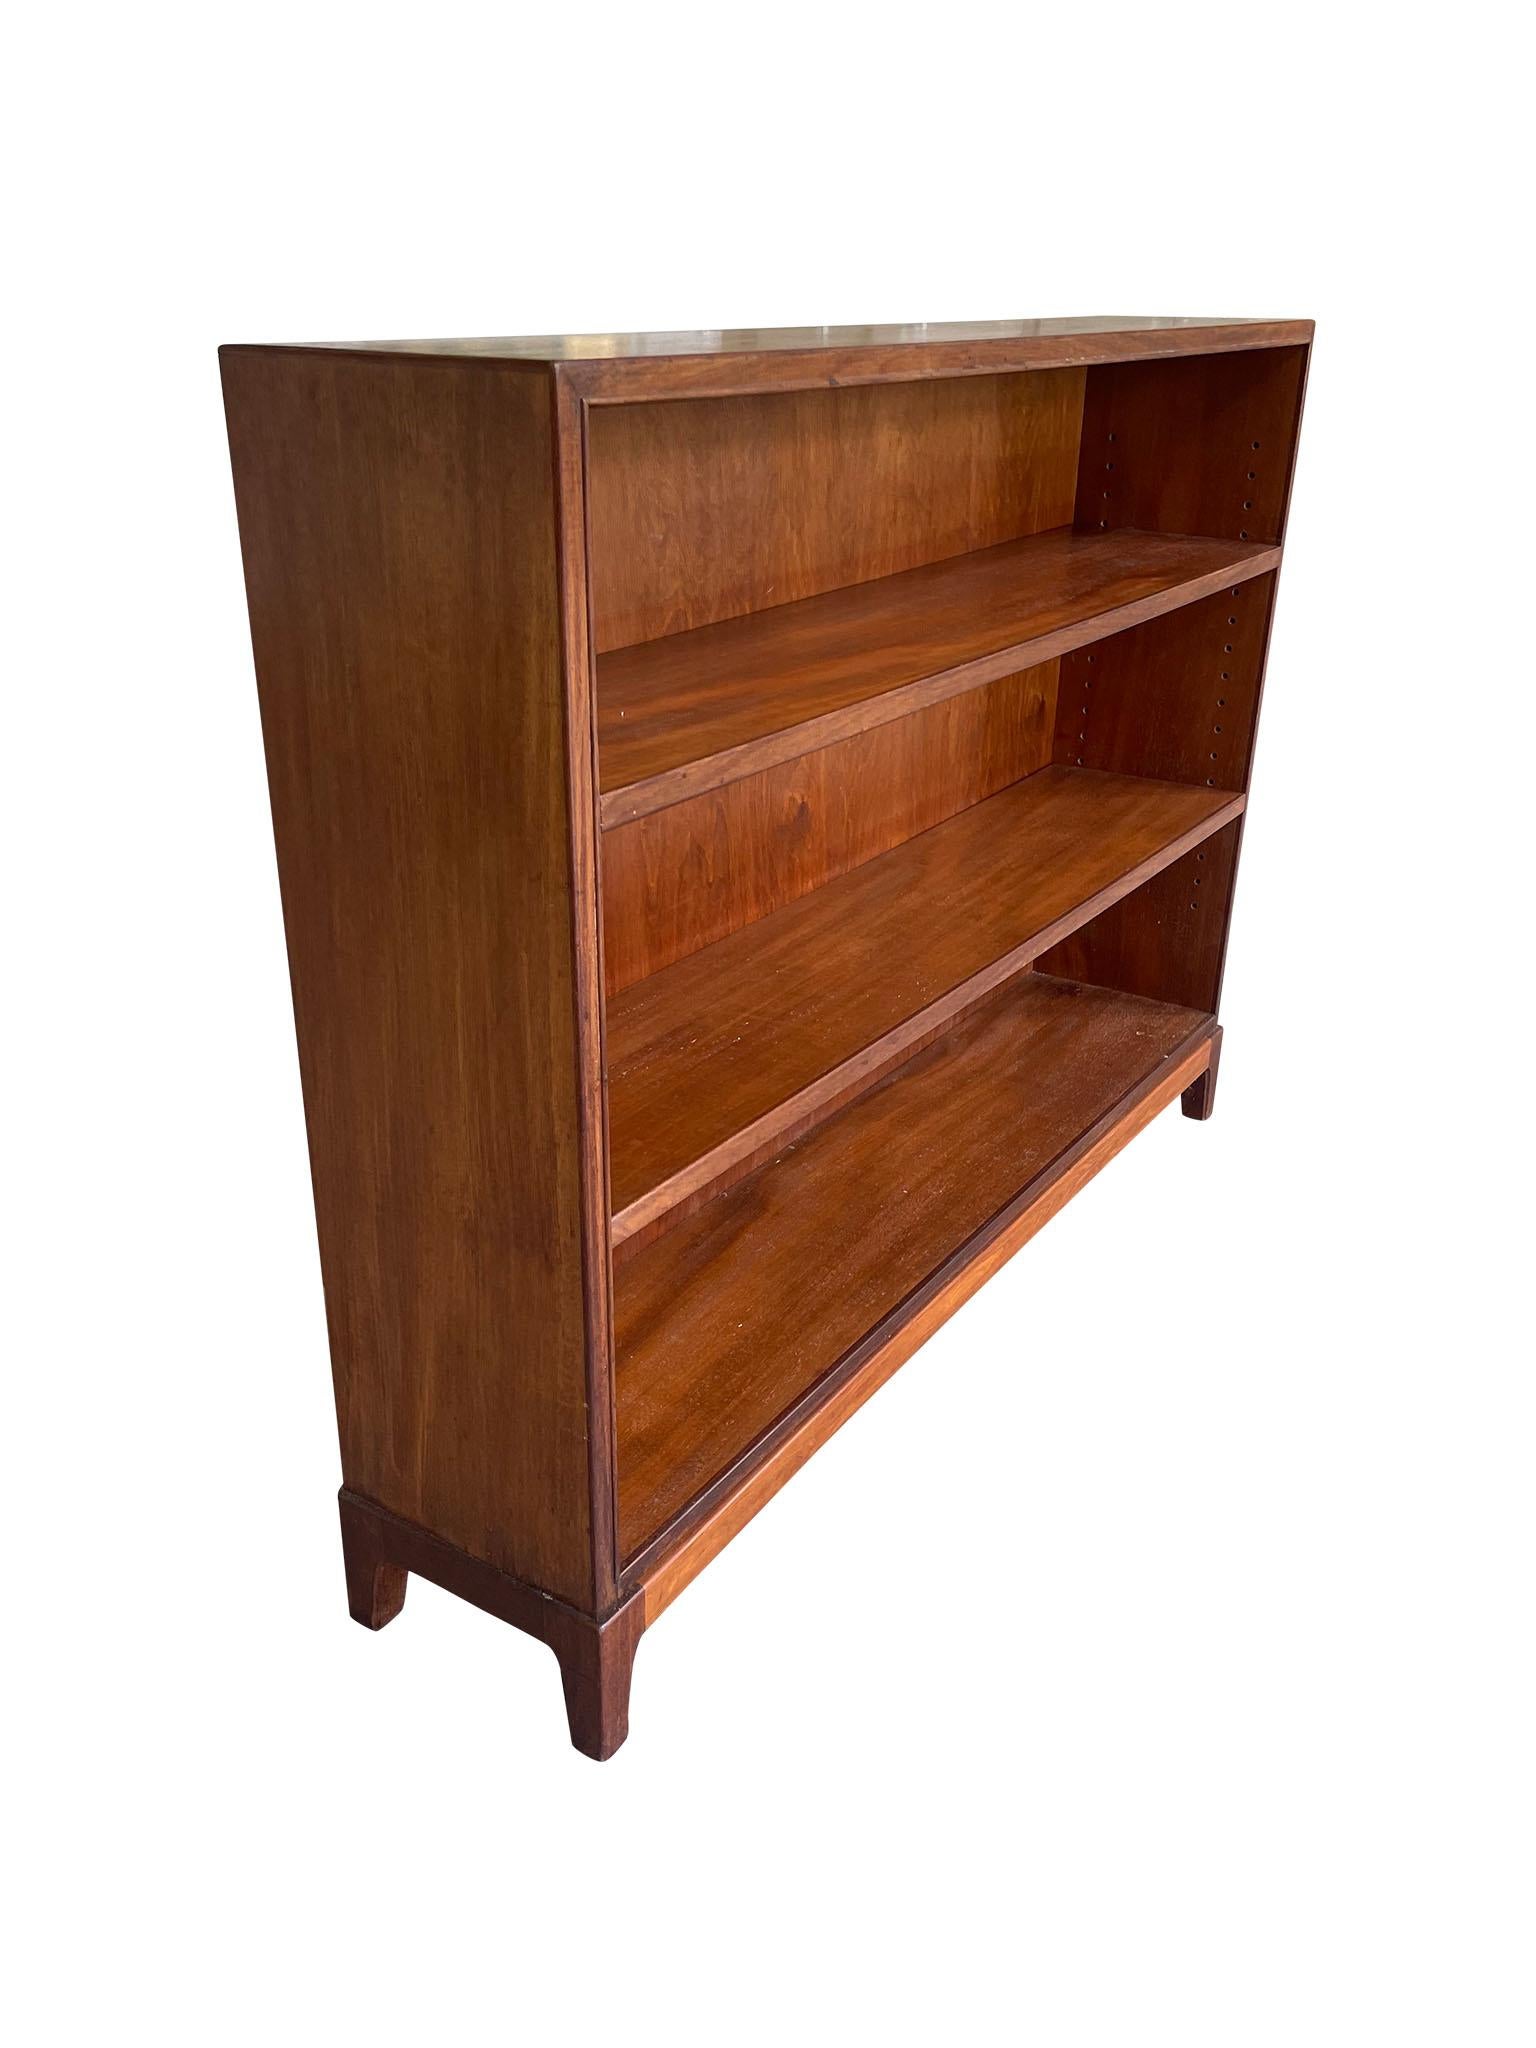 Lovely Mid-Century Modern Bookcase, designed by prolific Danish furniture designer Frits Henningsen. Crafted in versatile Rosewood, this open bookcase is designed with low, sleek legs and two adjustable shelves for flexibility and ease of use. The